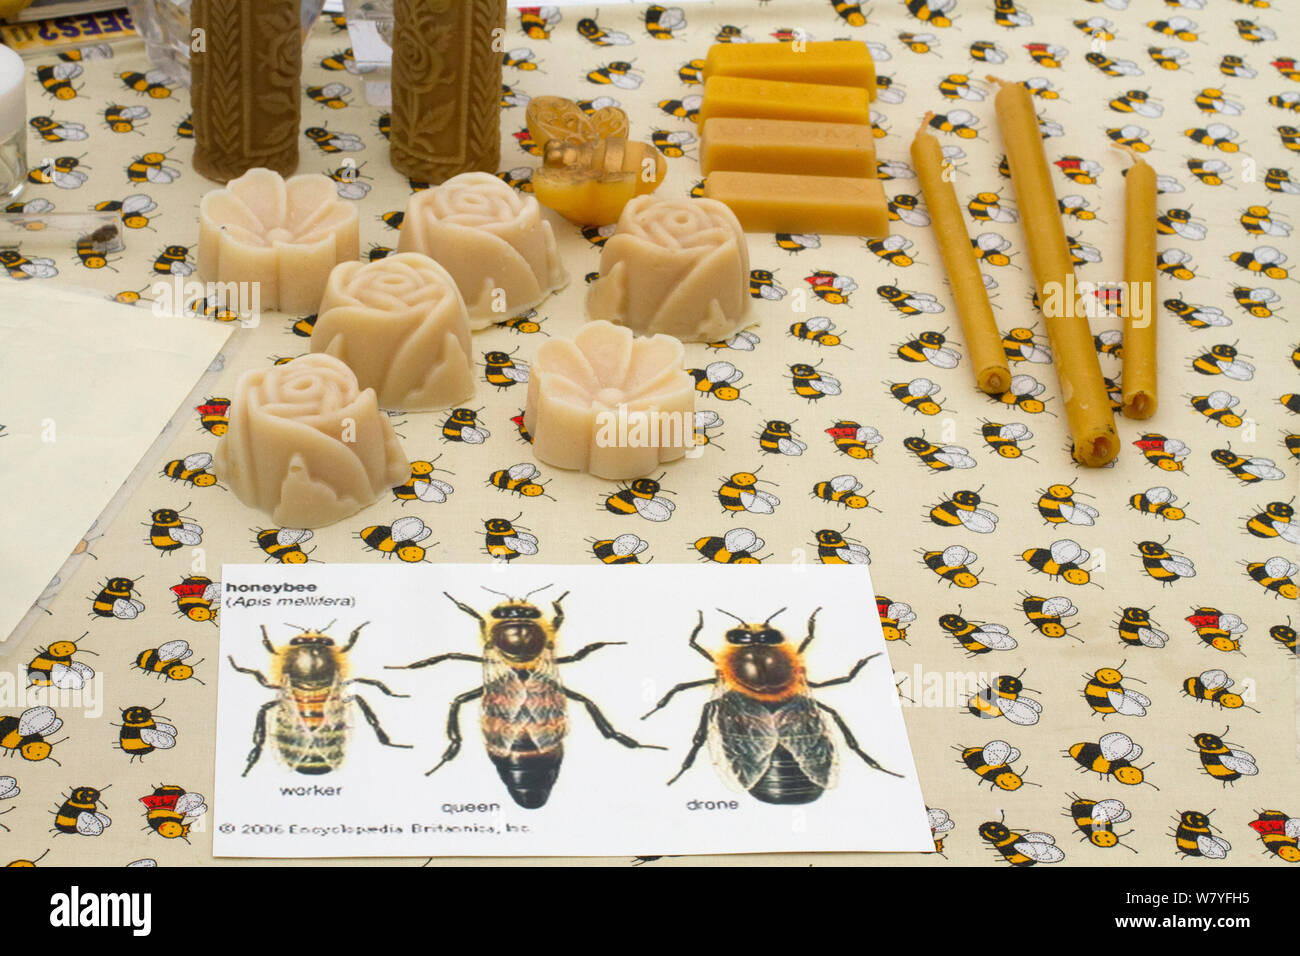 Diagrams of Honeybees (Apis mellifera) with beeswax products used as educational props at agricultural show. Gwent Beekeepers association stand at Usk agricultural show, Gwent, Wales, UK. September 2014. Stock Photo